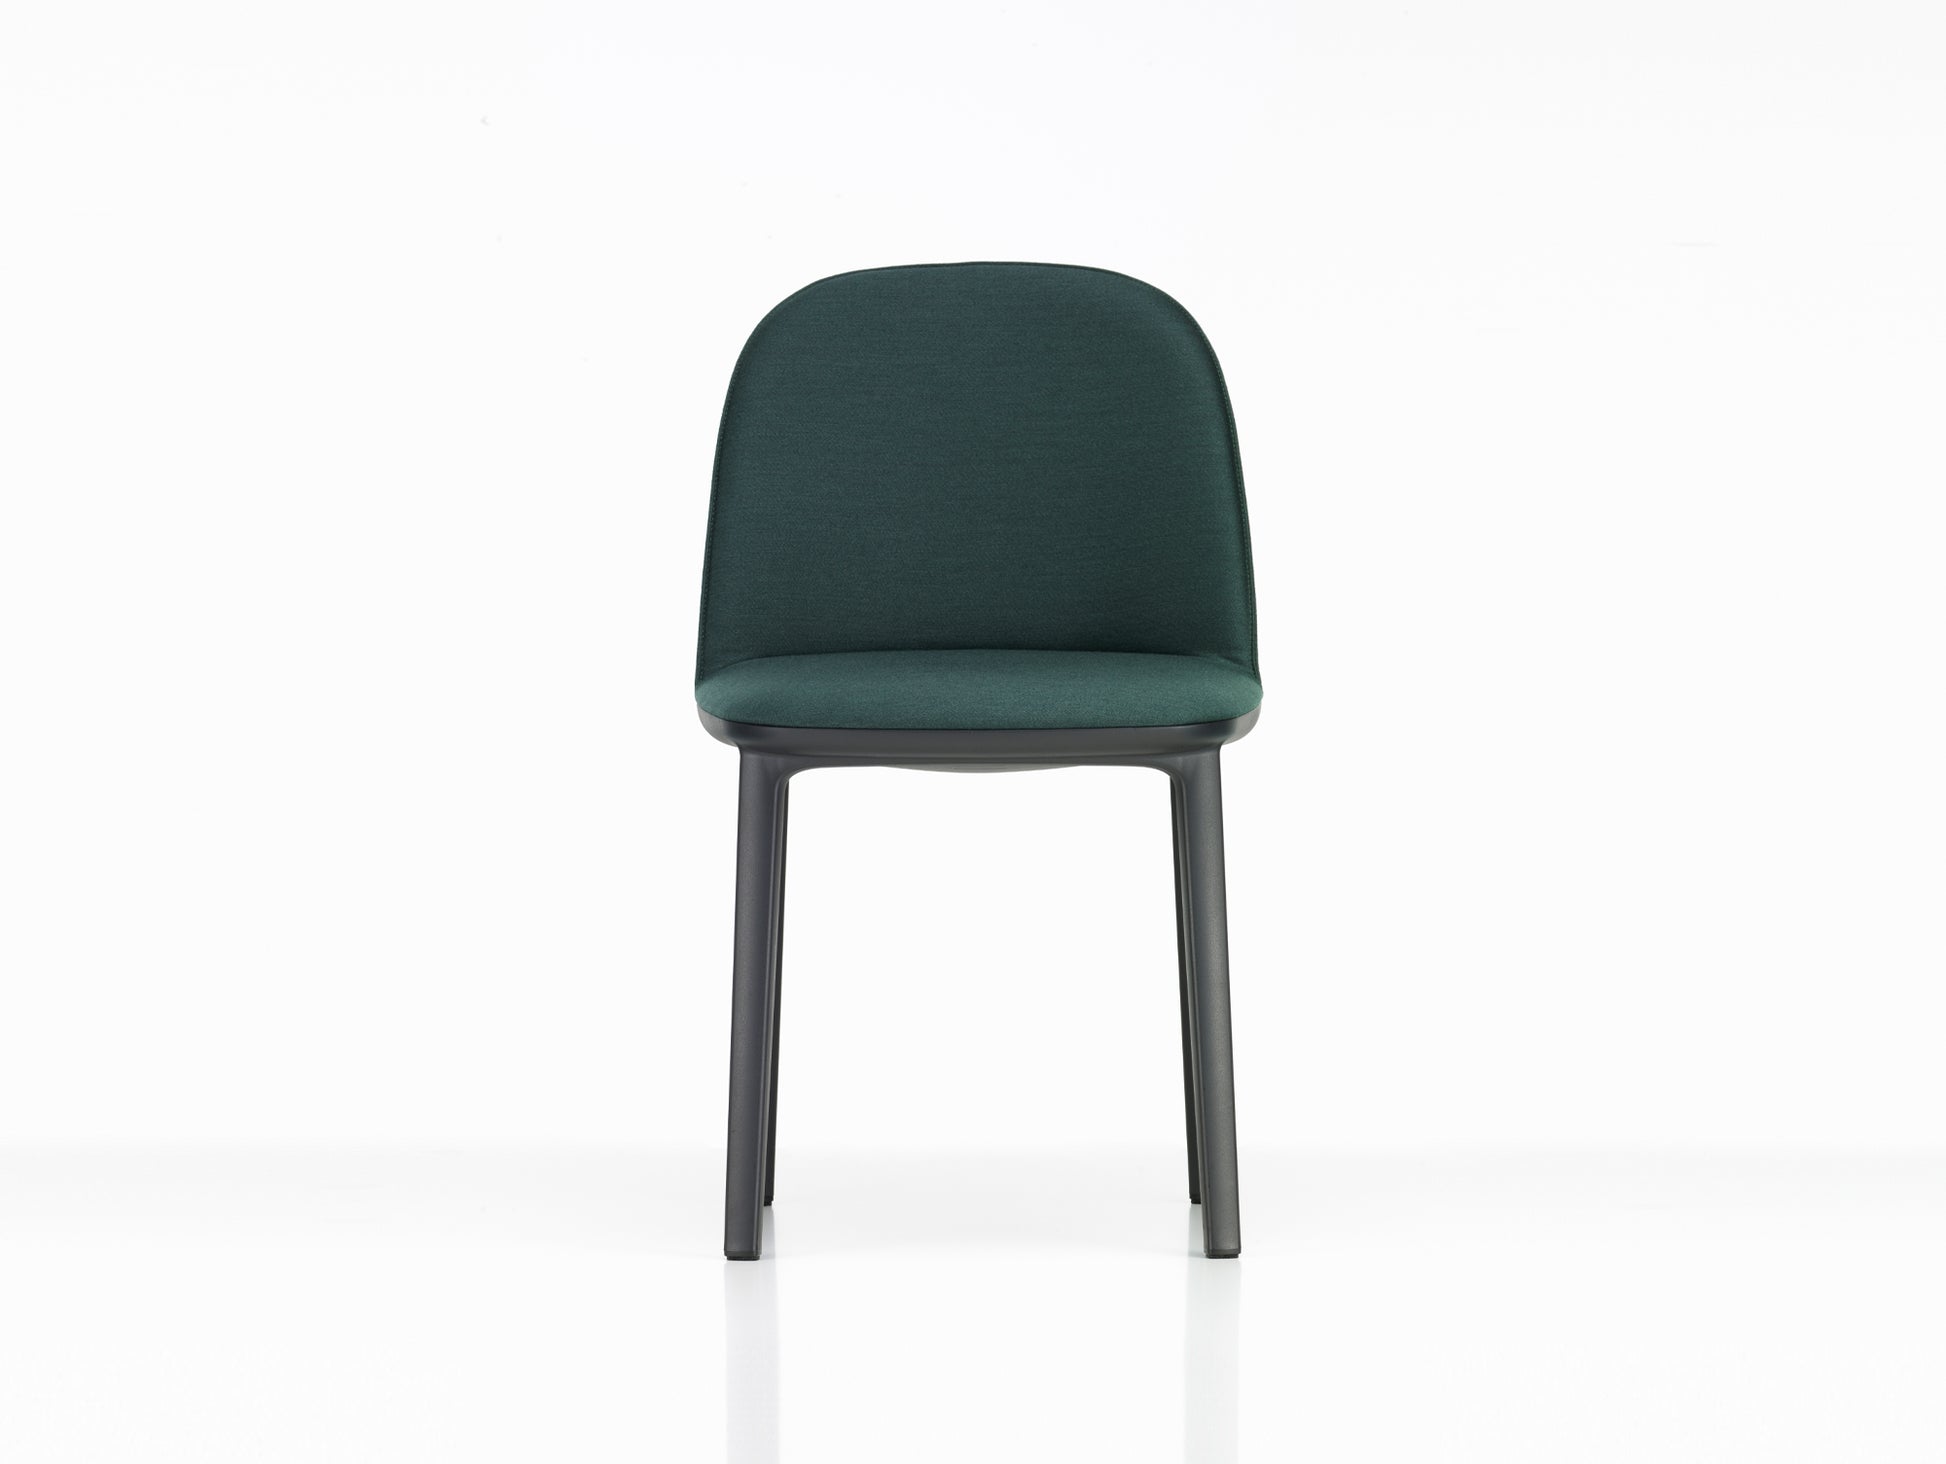 Softshell Side Chair by Vitra - Aura Hunger Green 07 (F100)